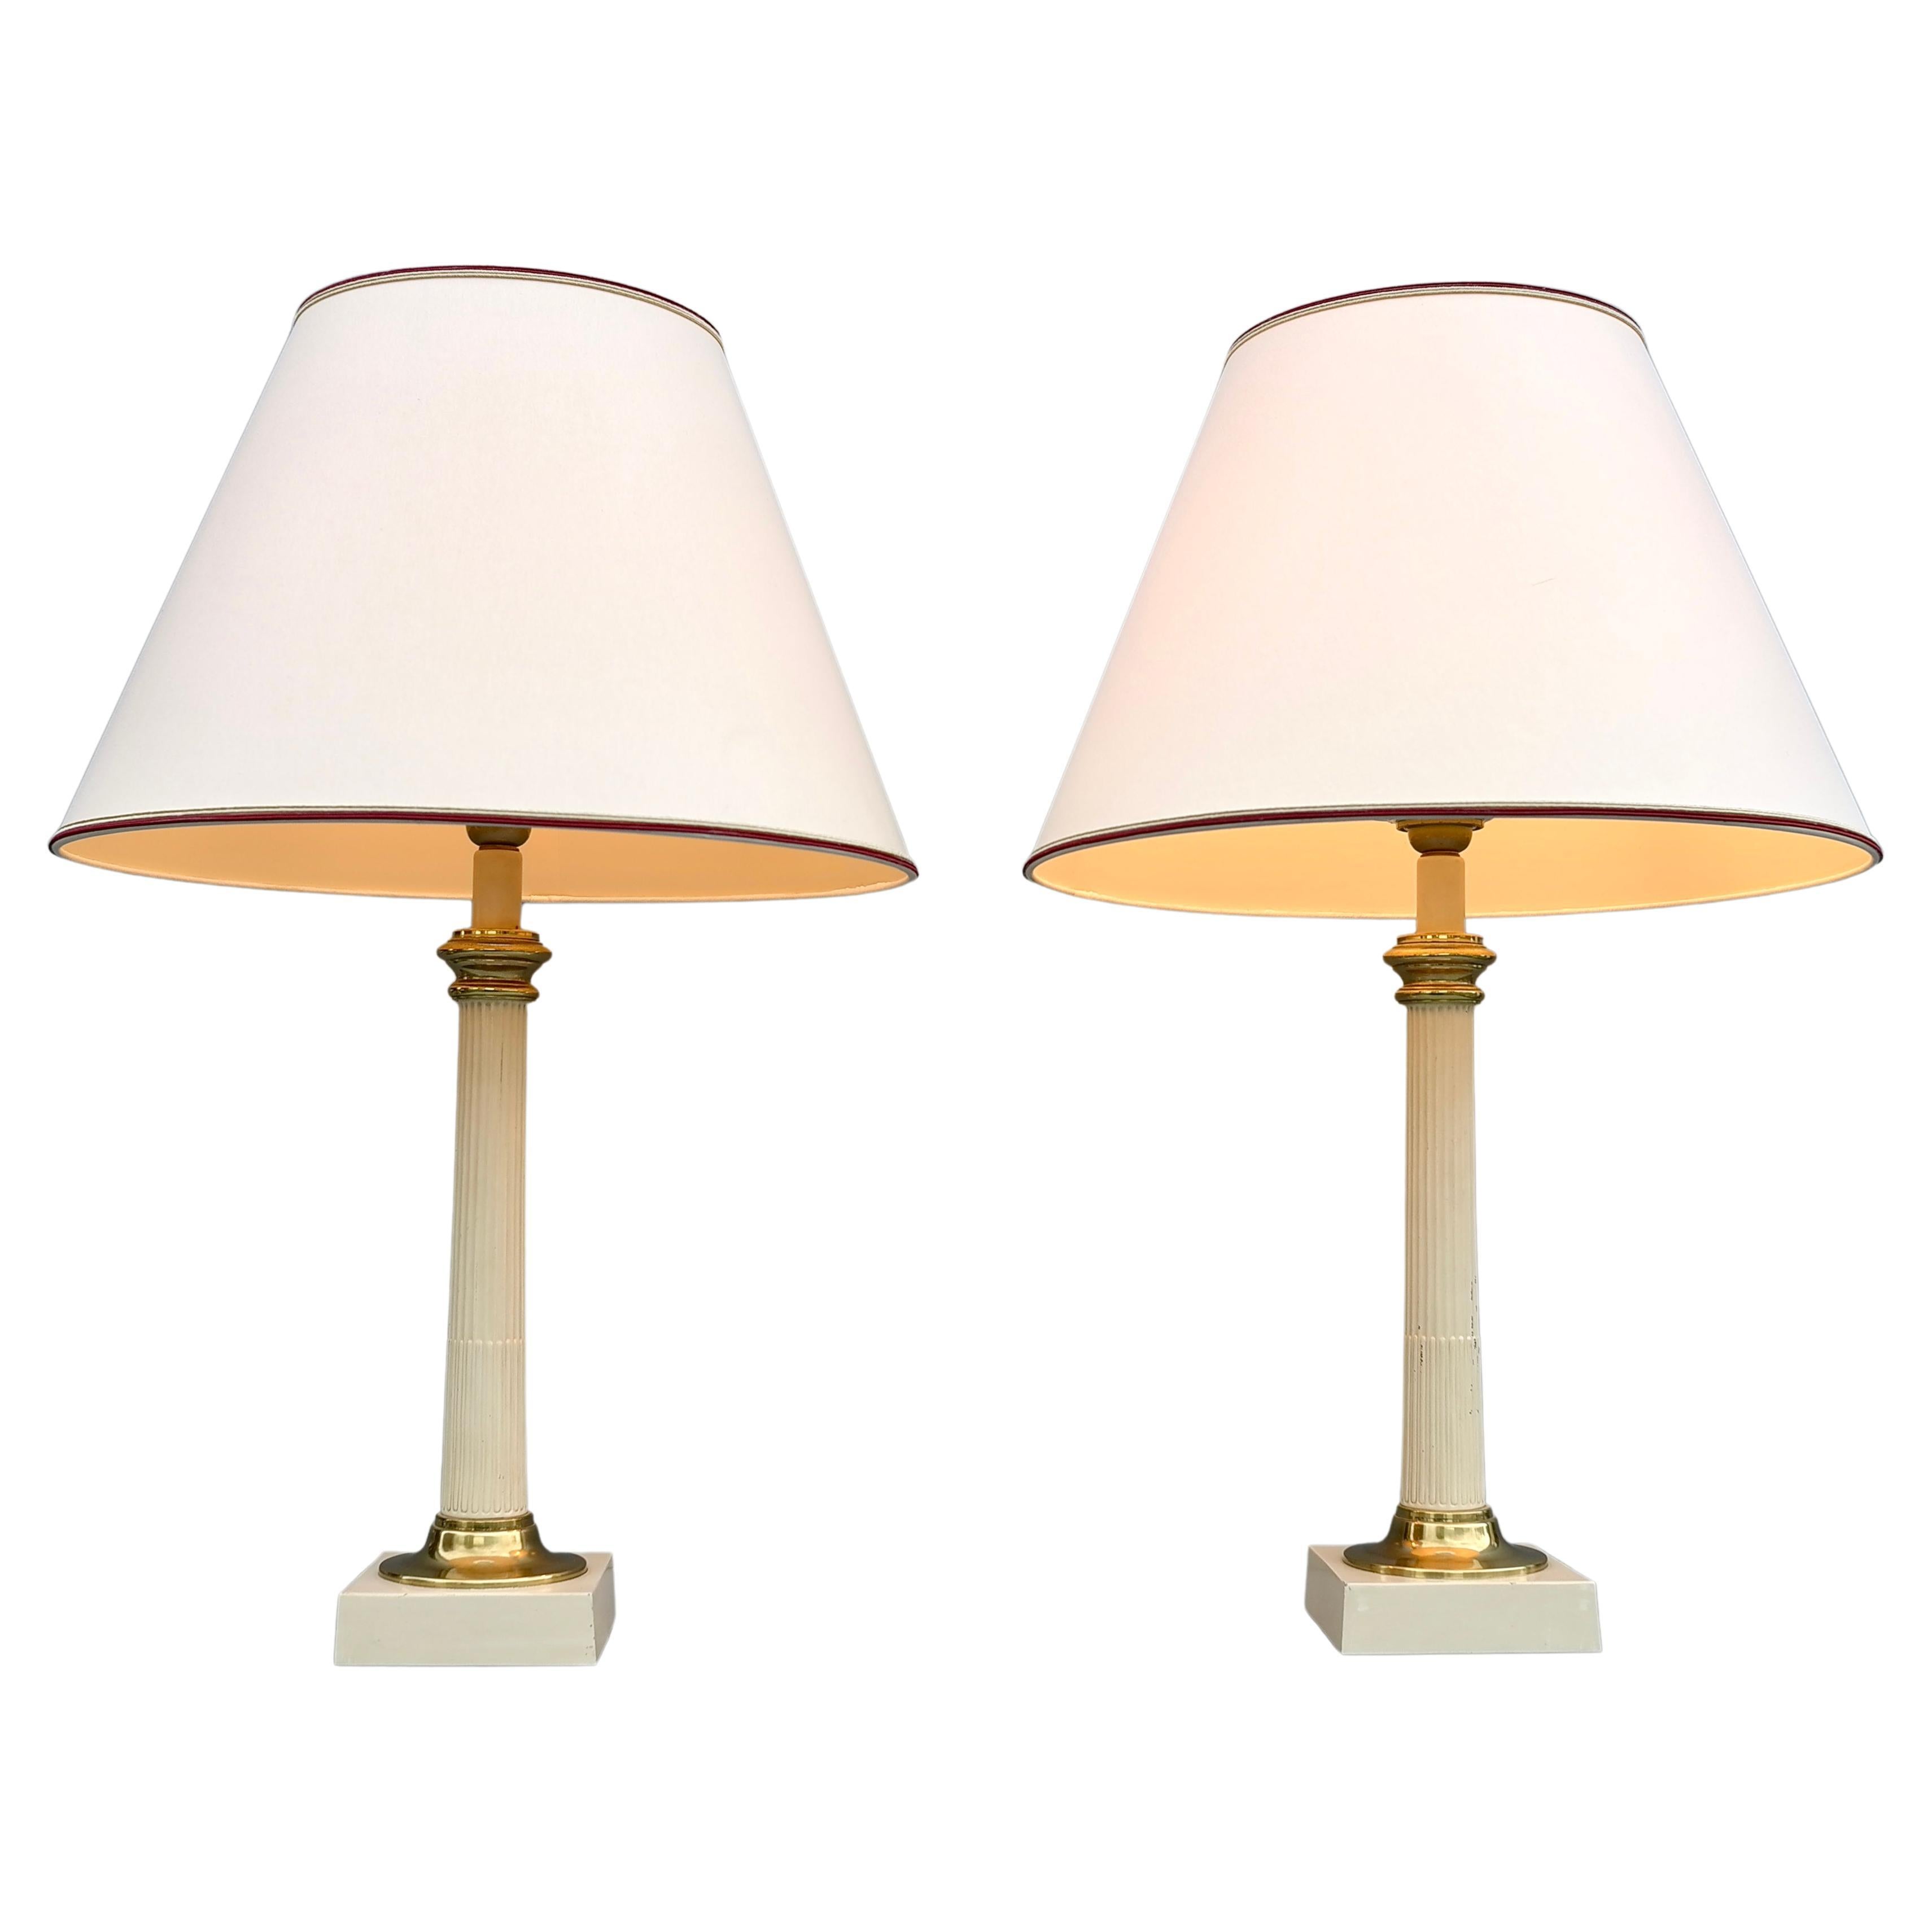 Pair of Column Table Lamps in Off White Metal and Brass Details, France 1960's For Sale